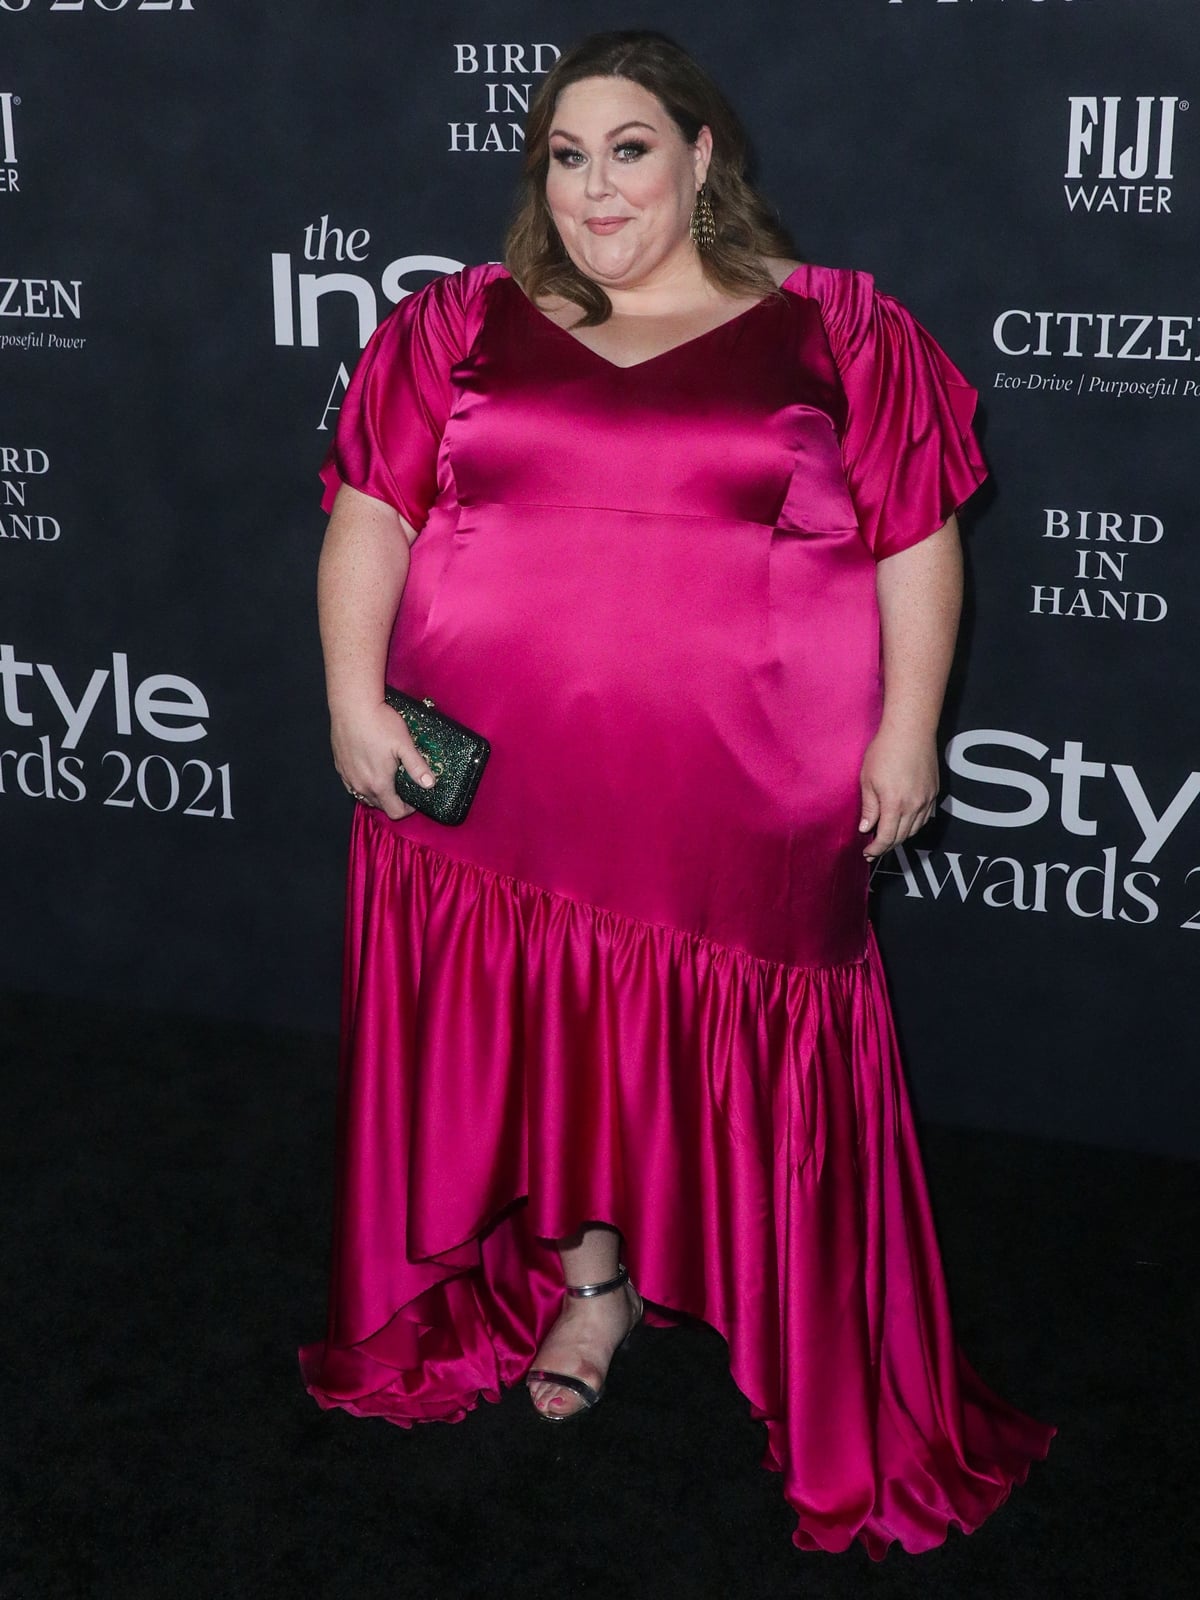 Chrissy Metz in a pink dress and metallic sandals at the 2021 InStyle Awards